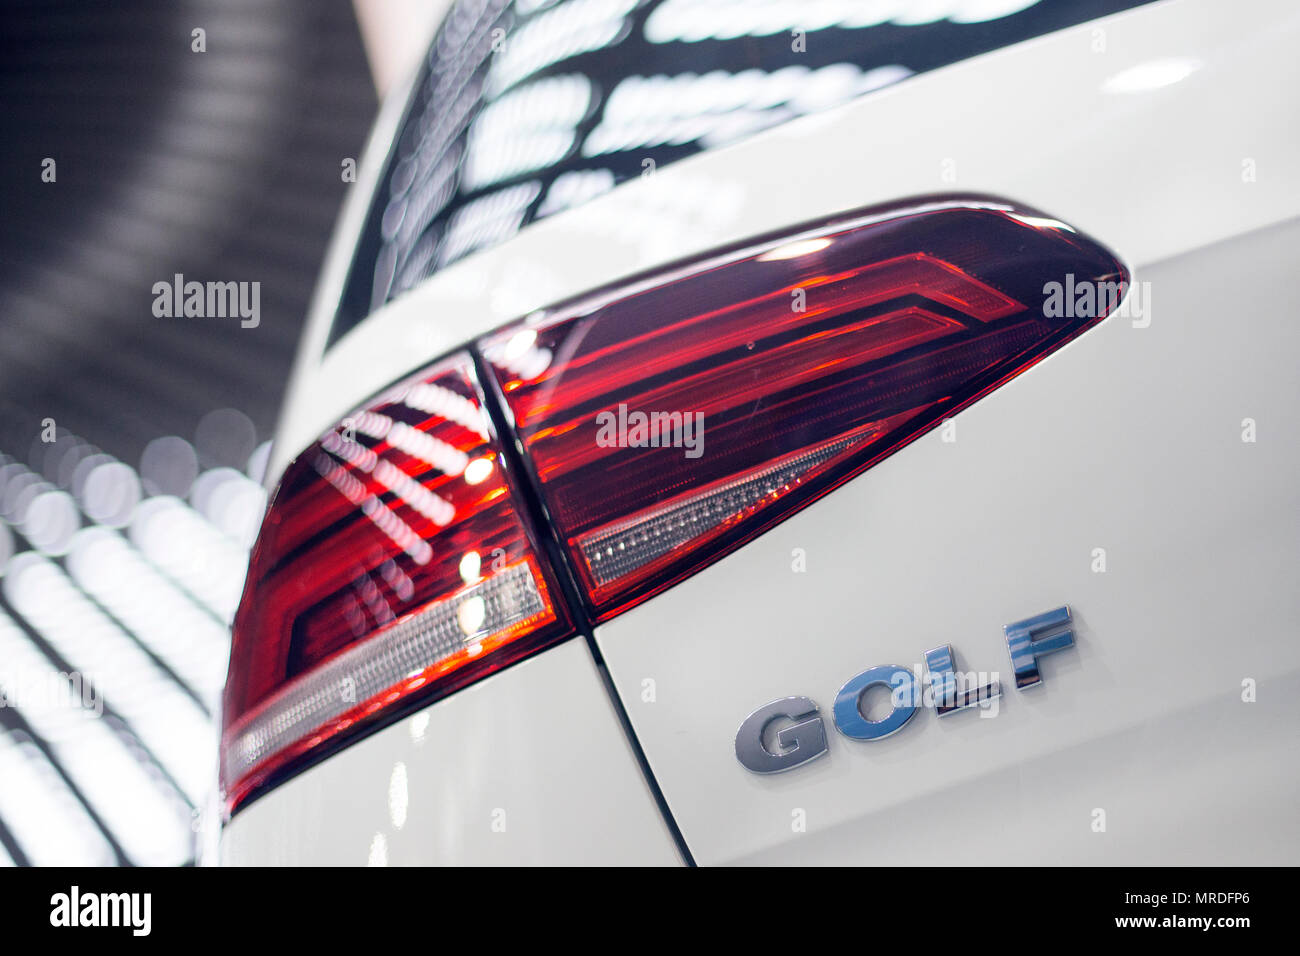 Volkswagen Golf sign on a car Stock Photo